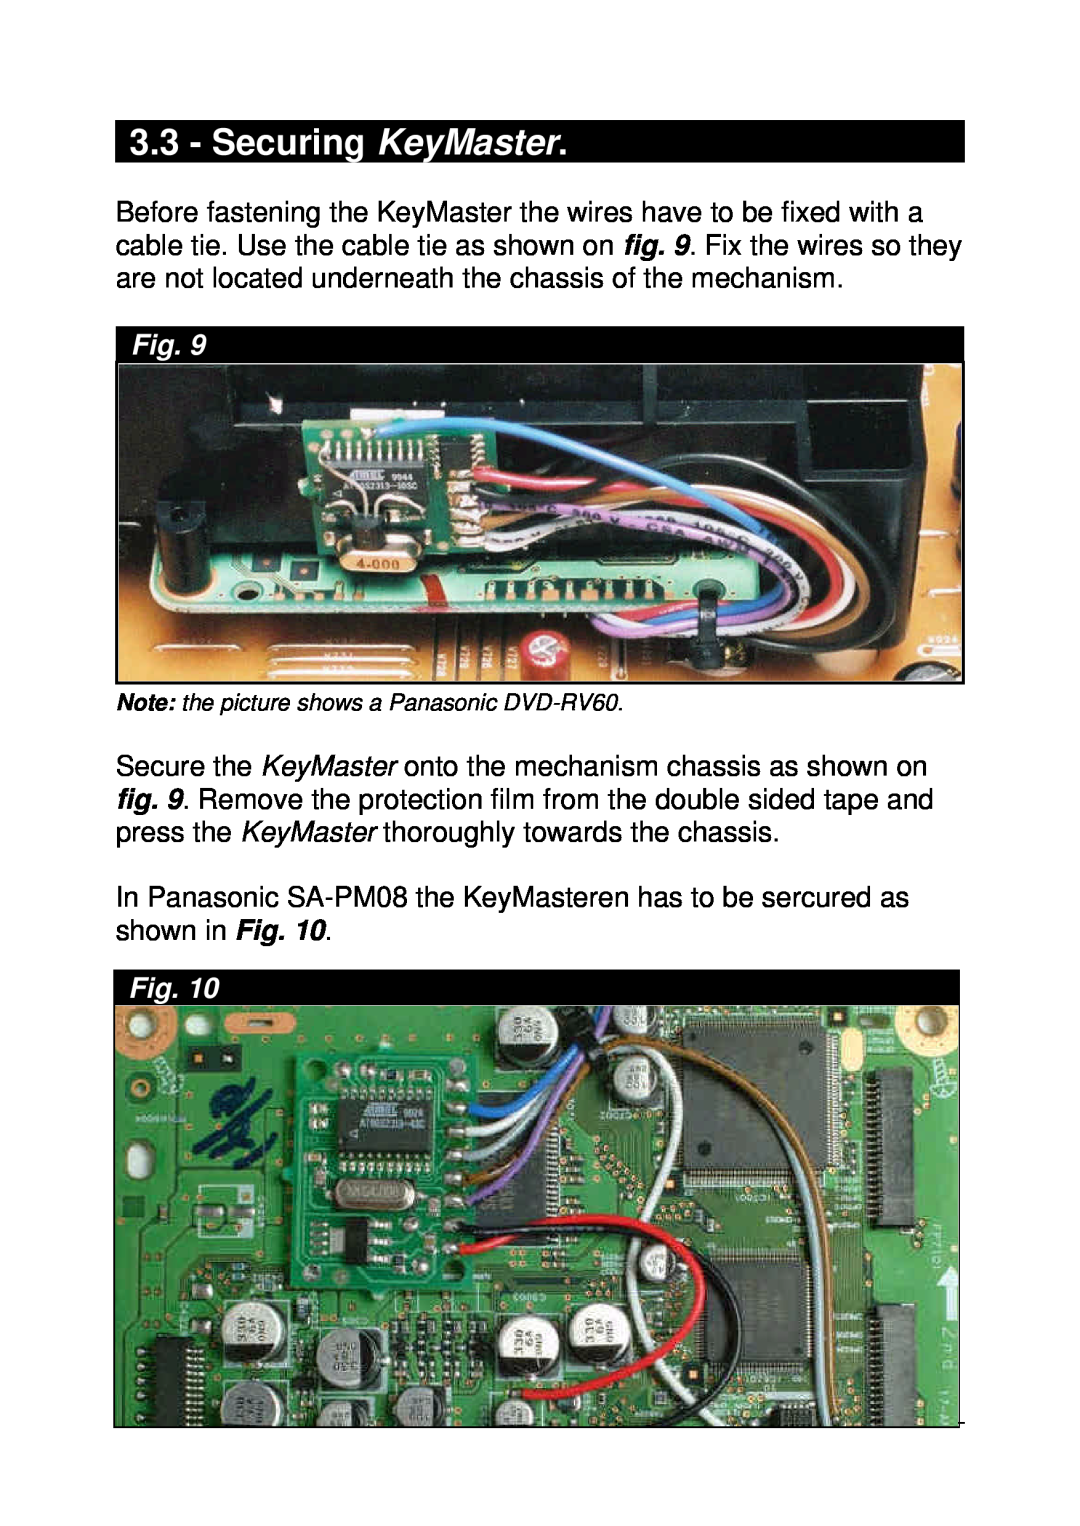 Panasonic 98RV1 installation manual Securing KeyMaster, Note the picture shows a Panasonic DVD-RV60 